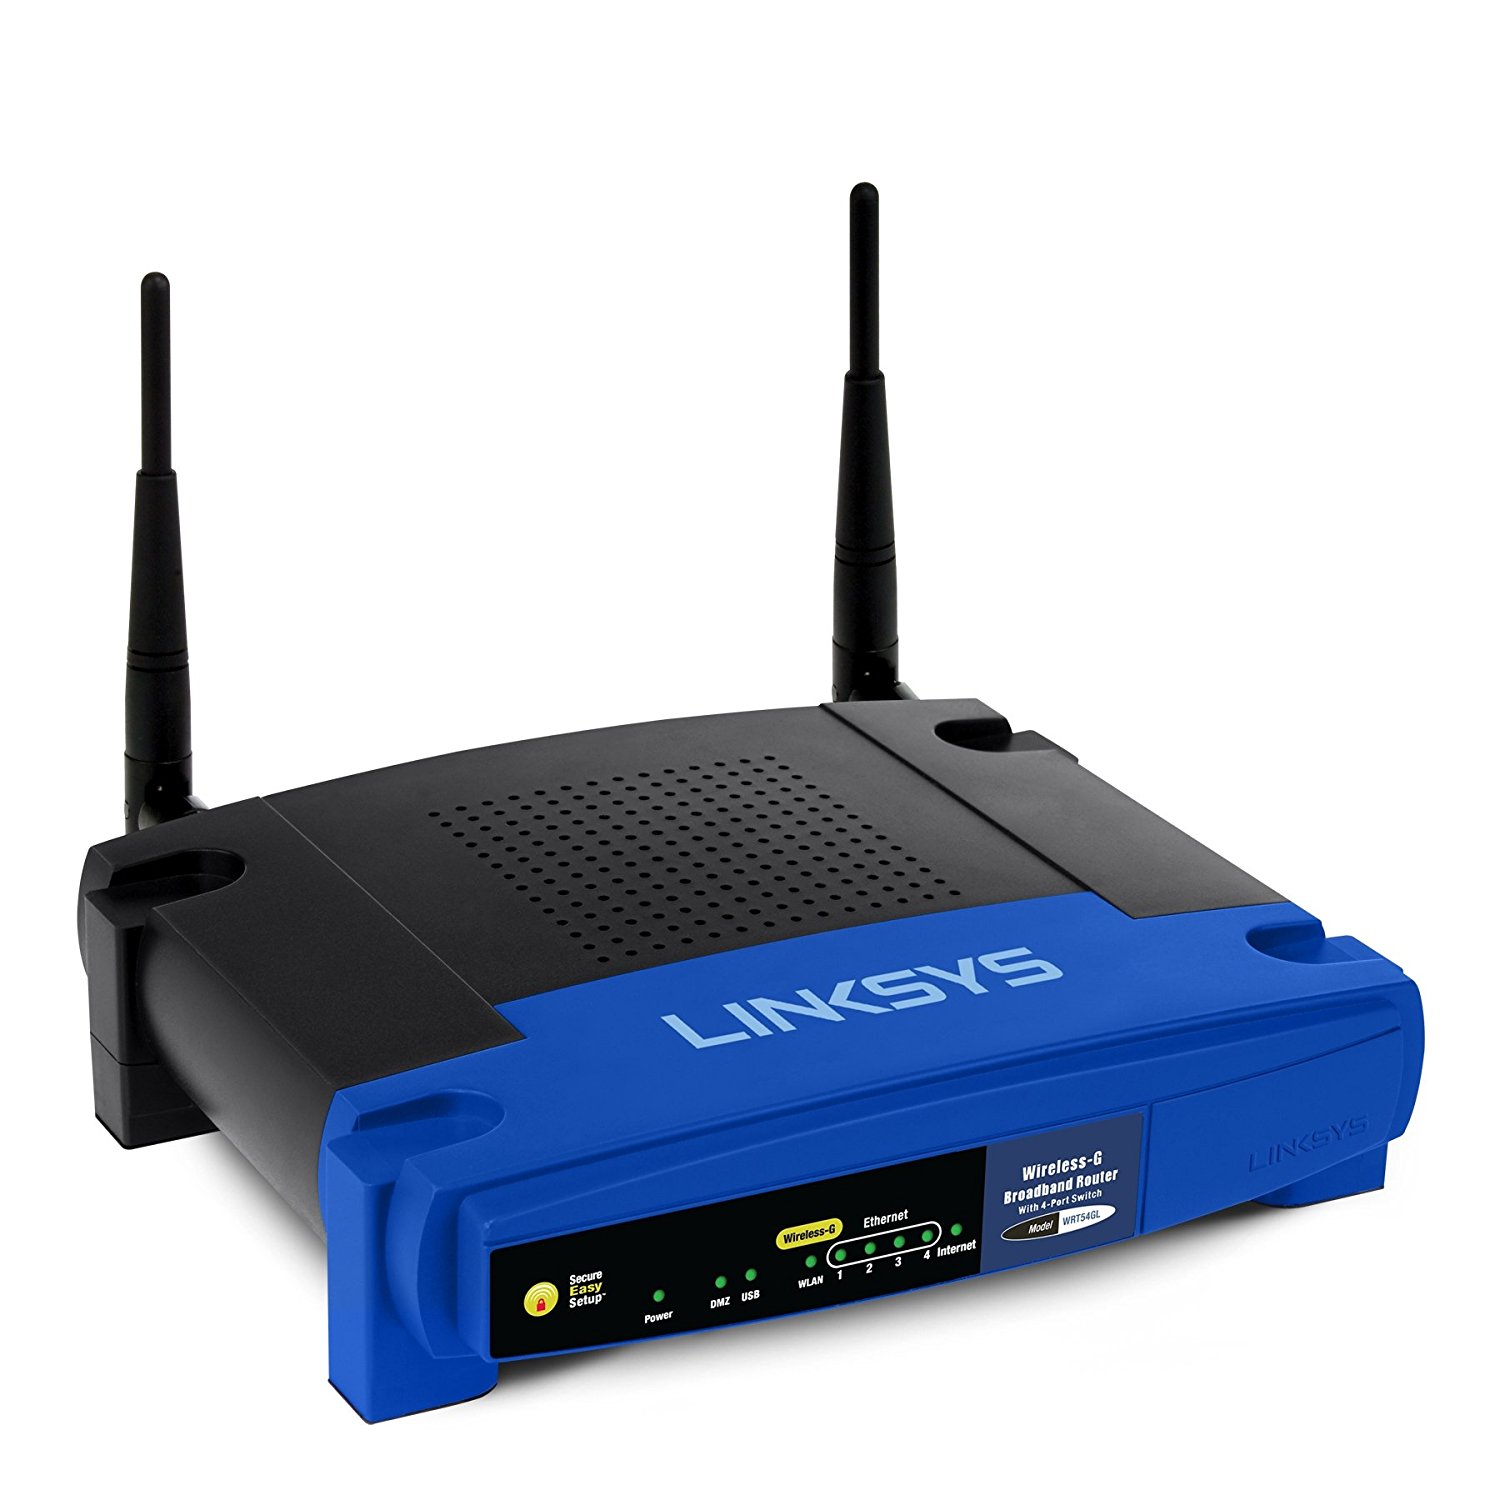 Access router